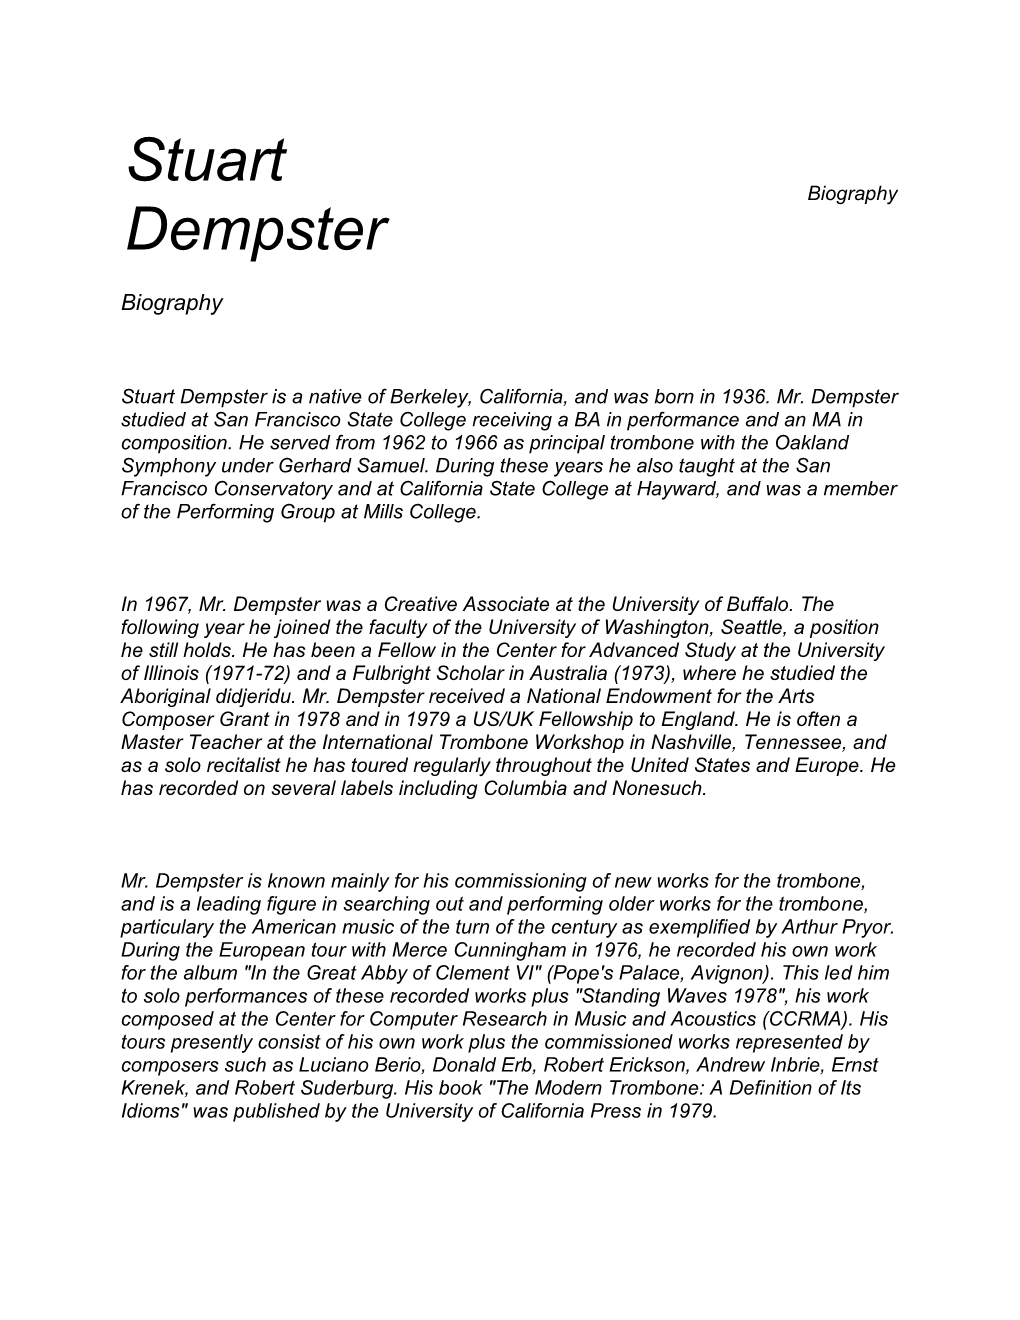 Stuart Dempster Is a Native of Berkeley, California, and Was Born in 1936